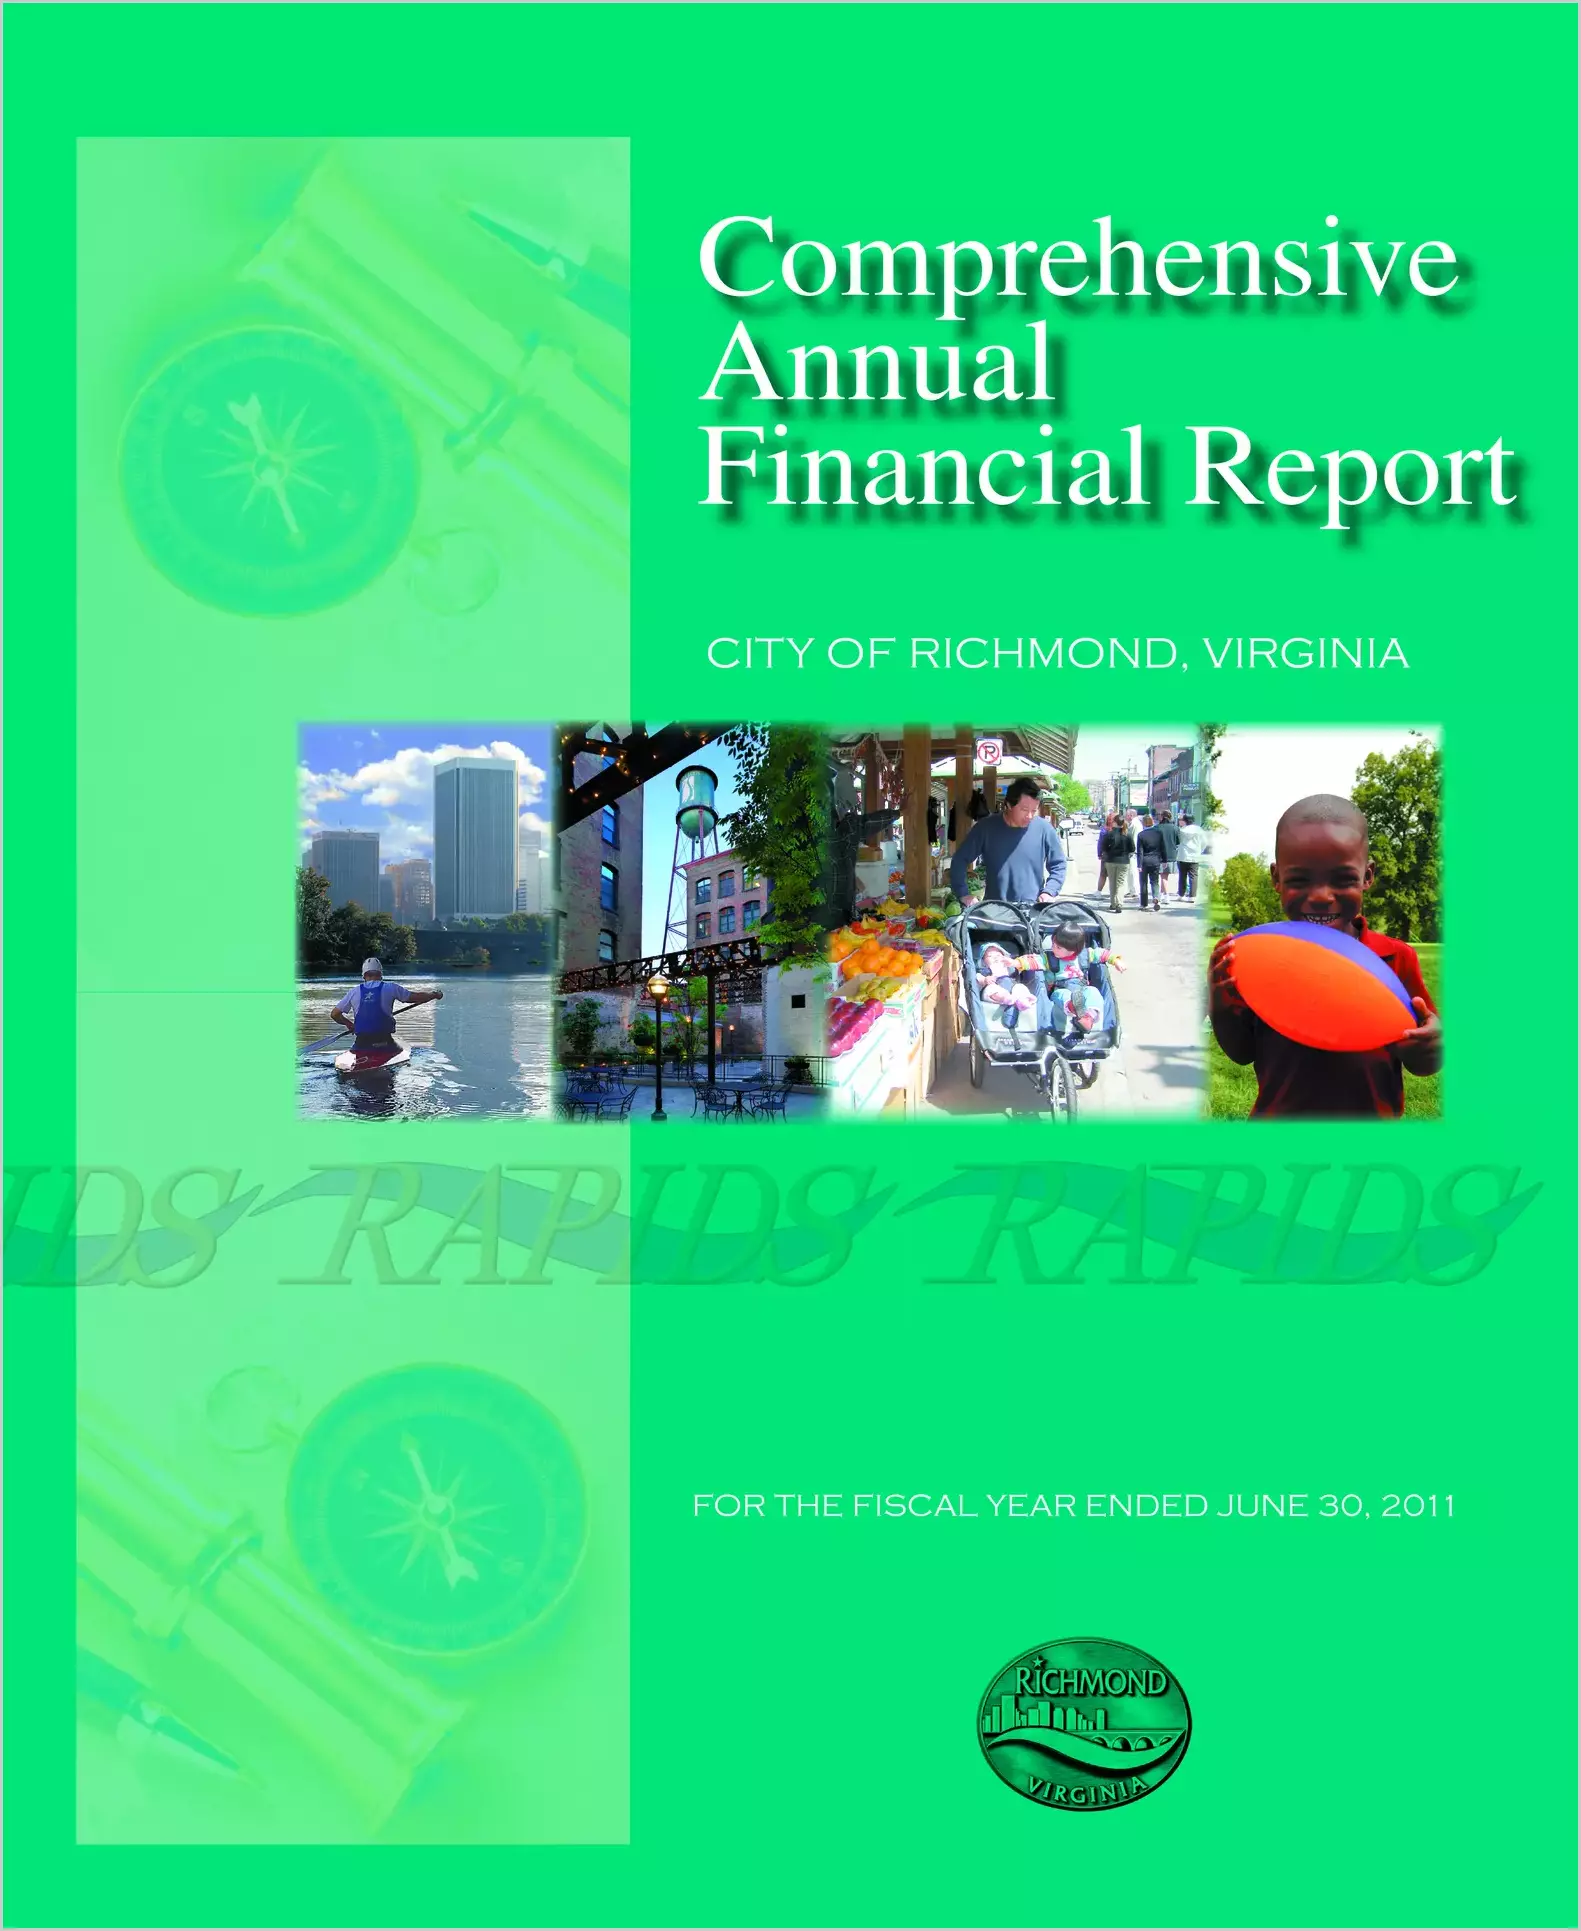 2011 Annual Financial Report for City of Richmond